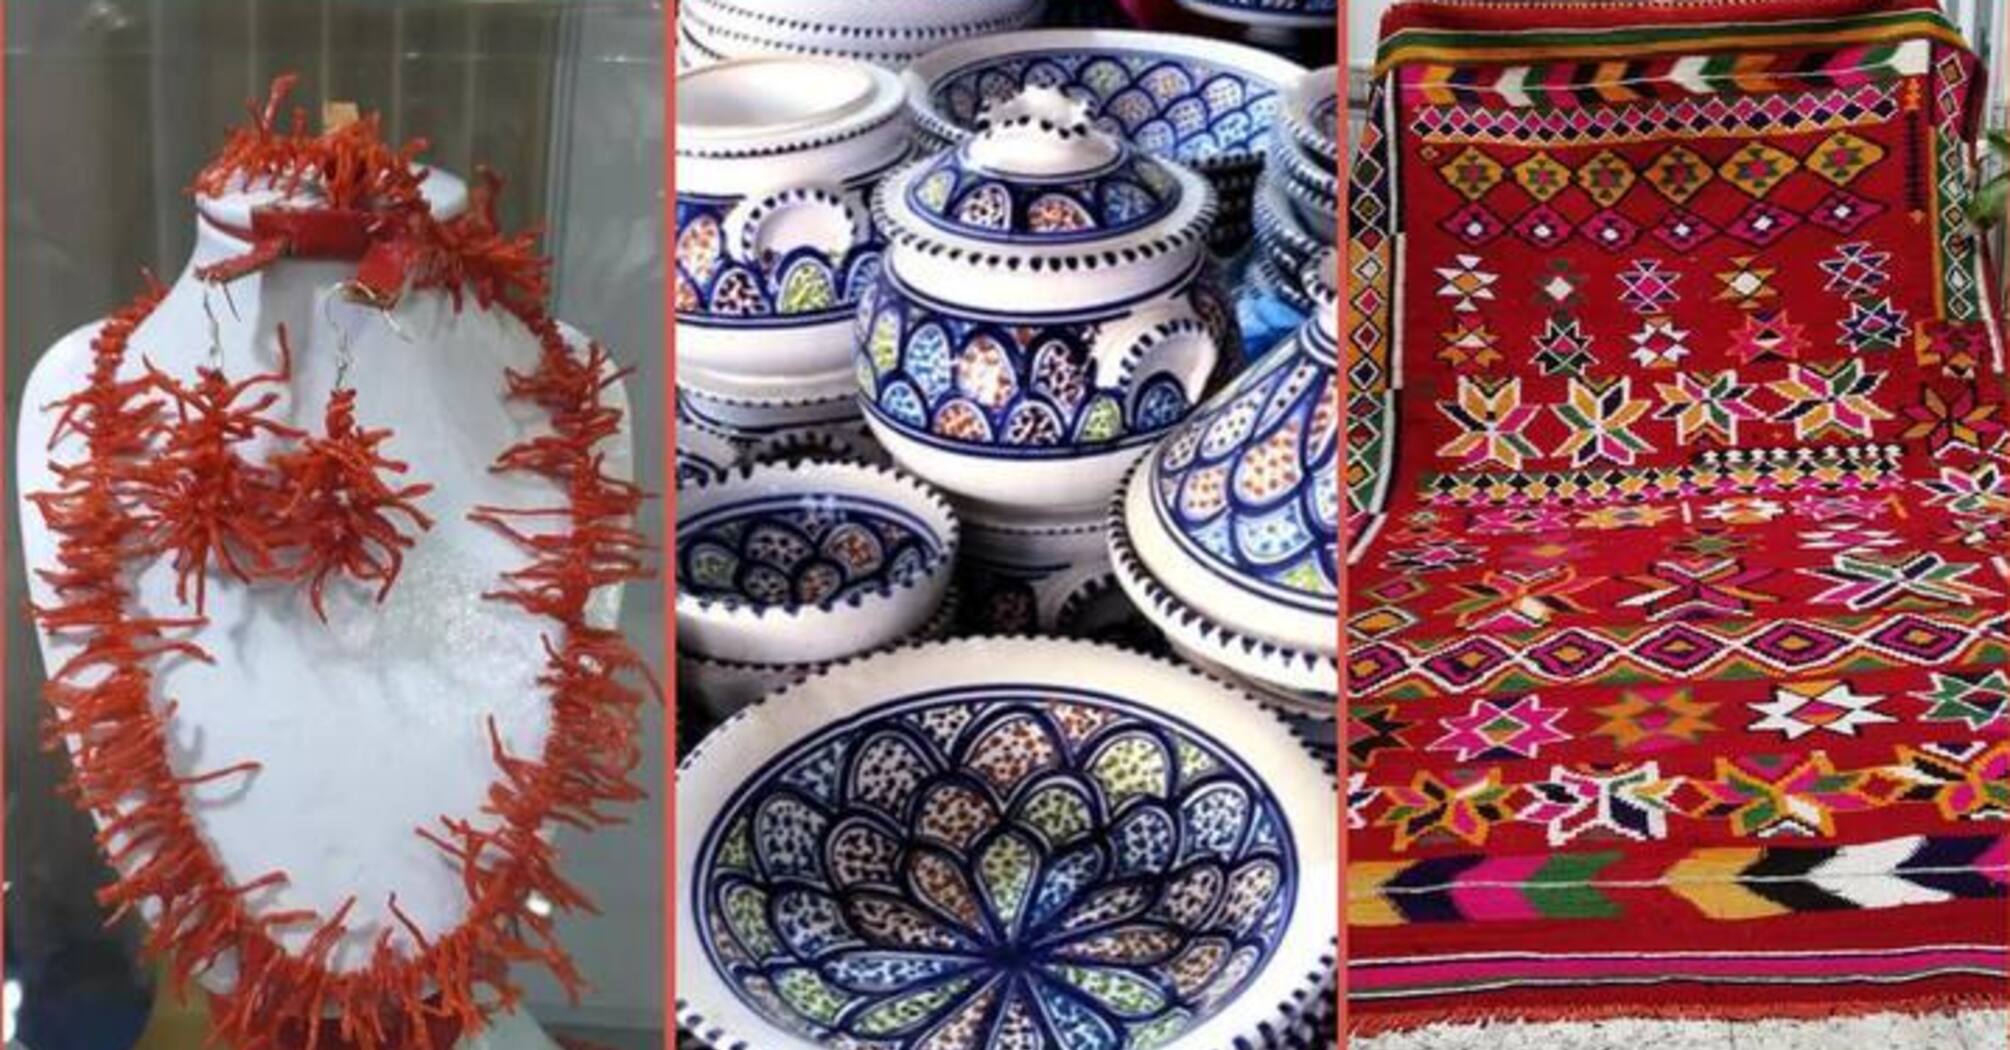 Ceramics, red corals, and woven blankets: 5 souvenirs worth bringing home from Algeria